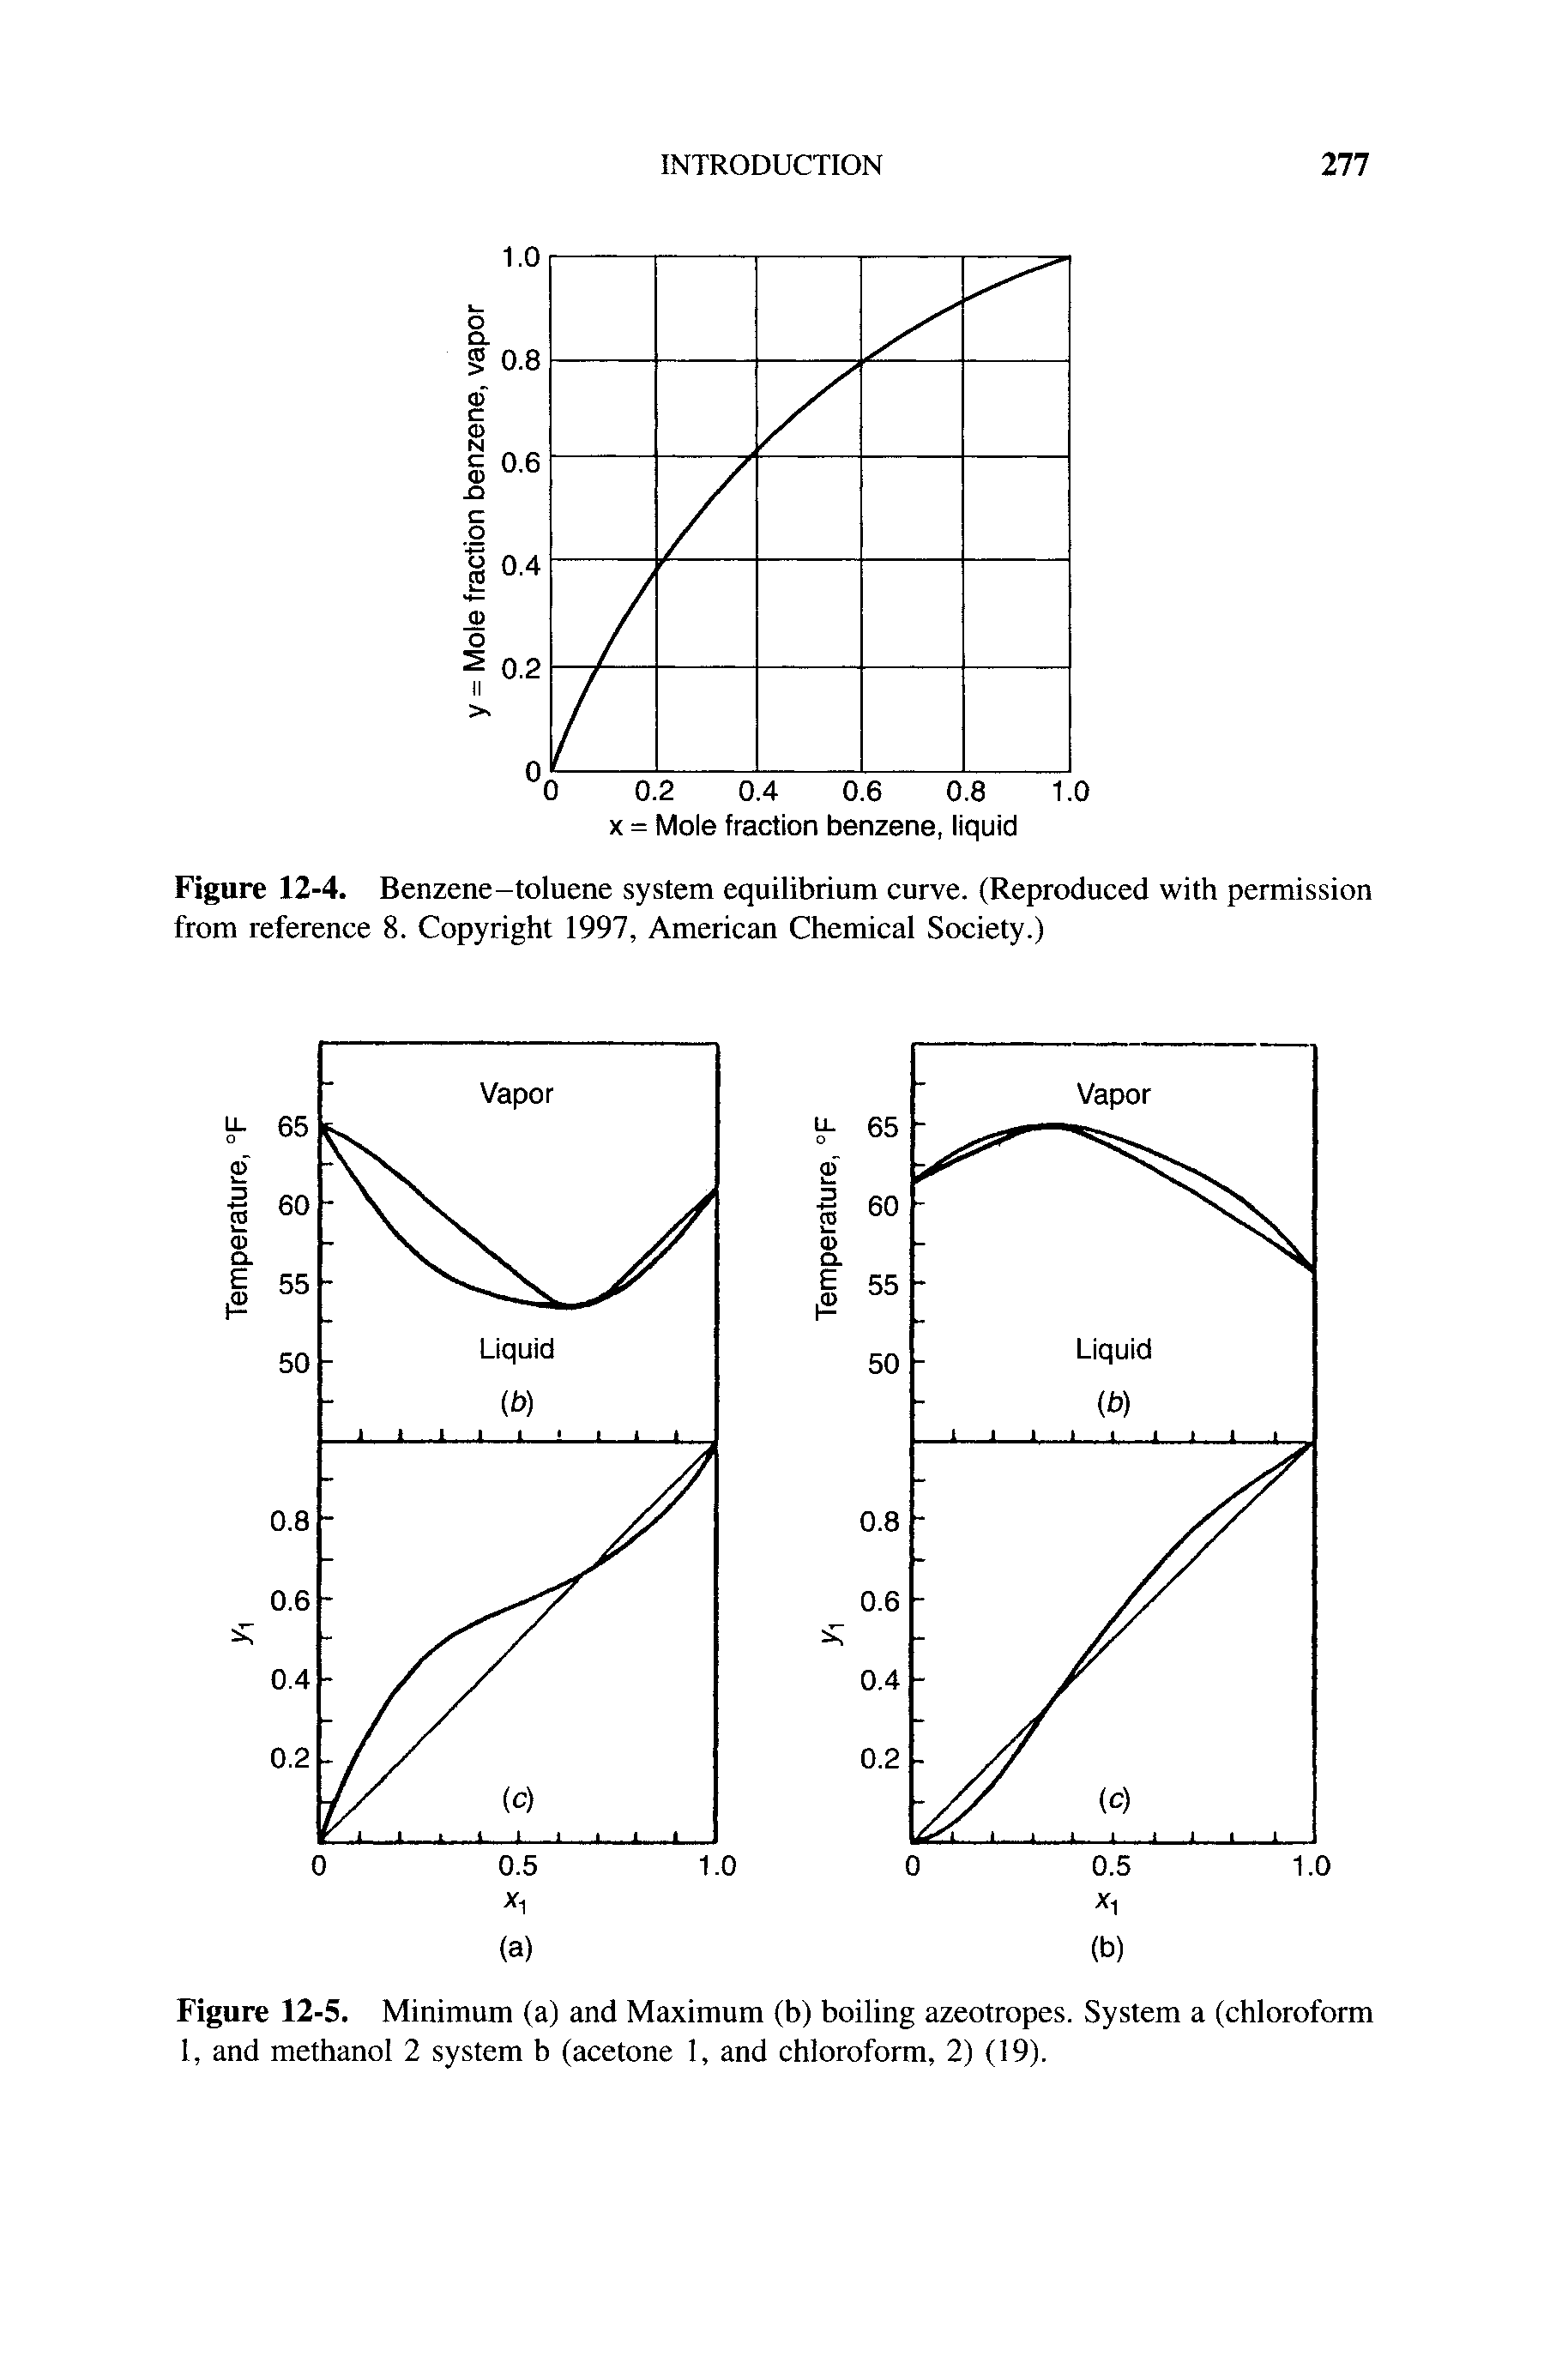 Figure 12-4. Benzene-toluene system equilibrium curve. (Reproduced with permission from reference 8. Copyright 1997, American Chemical Society.)...